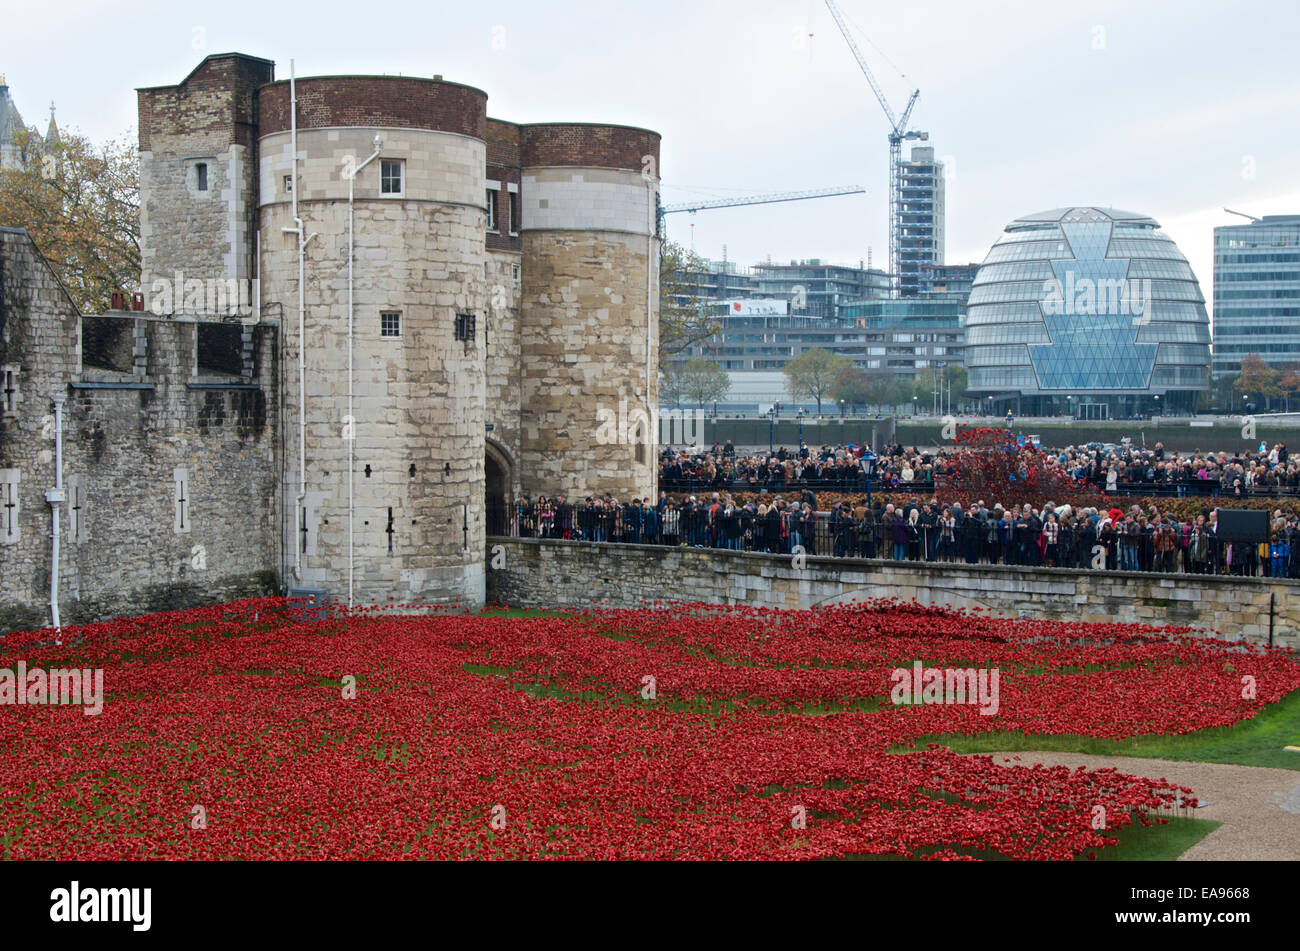 Crowds gather on the morning of Remembrance Sunday 9th November 2014 at the Tower of London, to see the poppies in the moat. Stock Photo